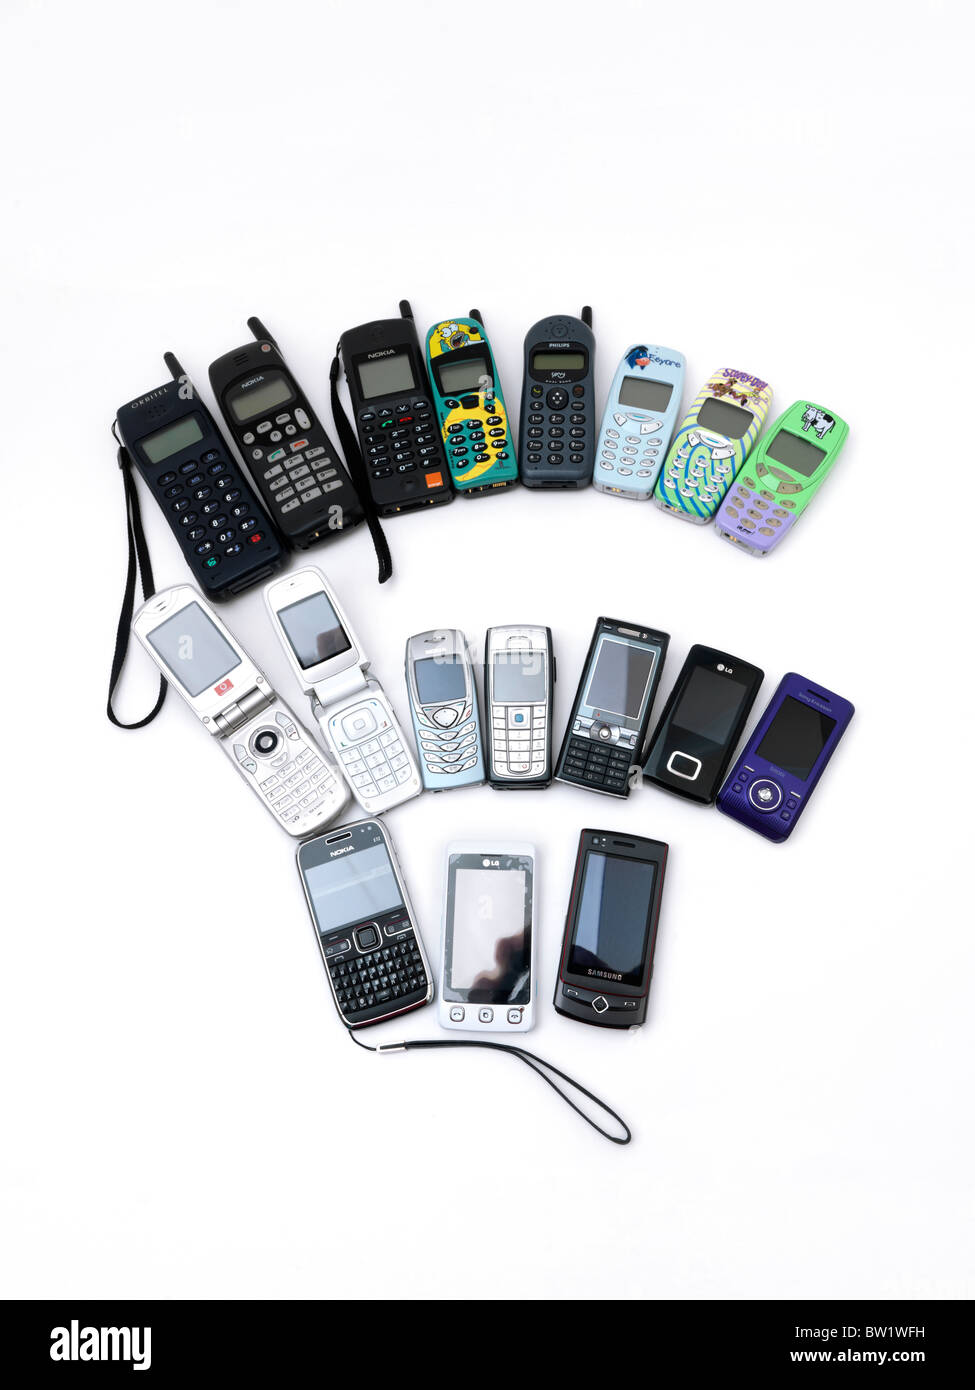 Old And New Mobile Phones Fanned Out Nokia, LG, Samsung, Motorola, Phillips, Sony Ericsson Stock Photo Alamy